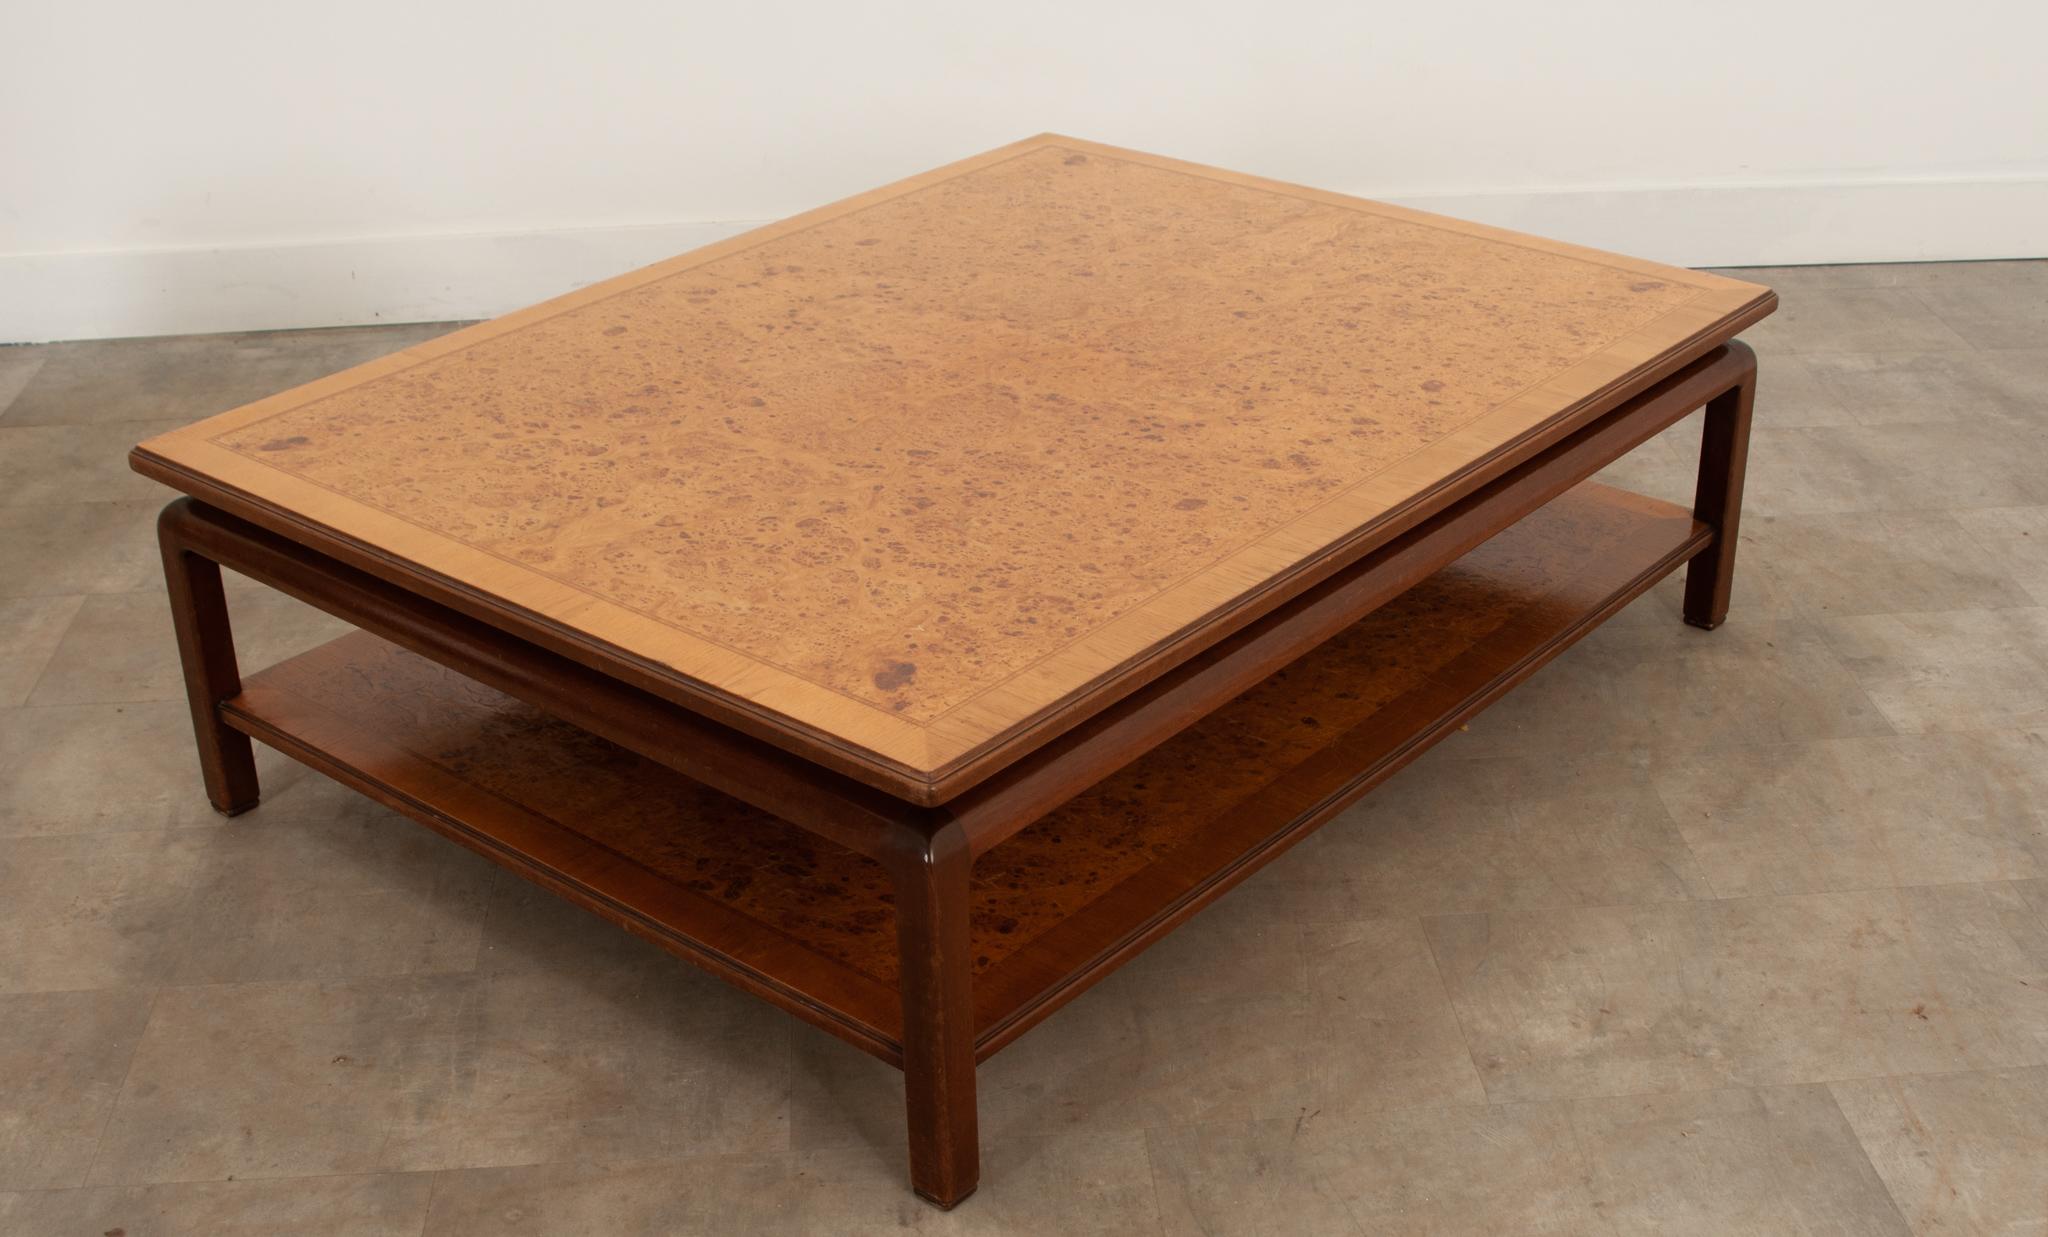 This incredible coffee table will make an impact in any space. The top showcases the fantastic bookmatched burl elm wood grain. The lower shelf is just as large as the top and slightly darker- it allows for a nice amount of hidden, but accessible